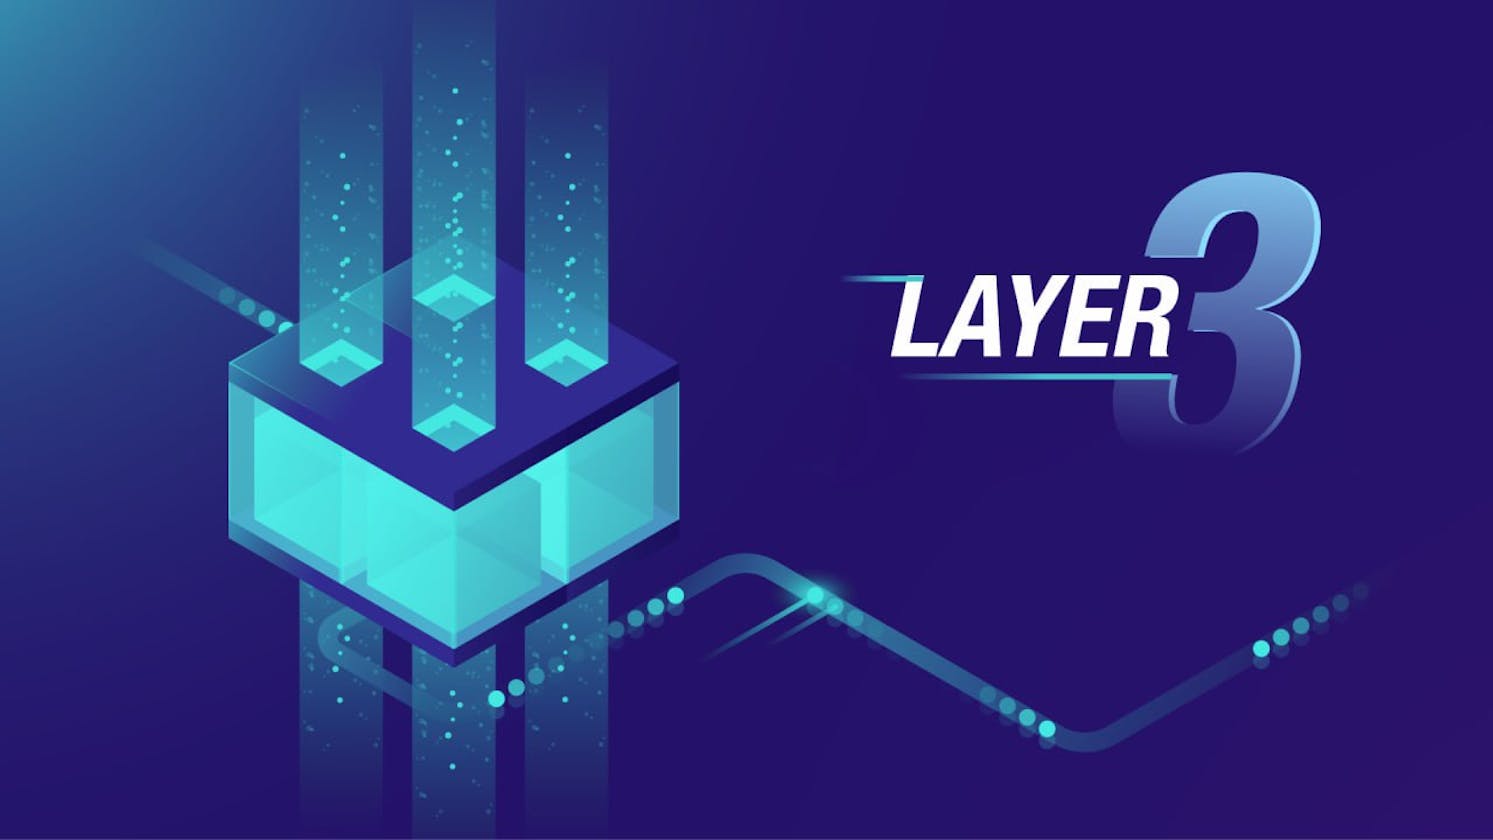 Layer 3 Is Going To Lead The Next Bull Run